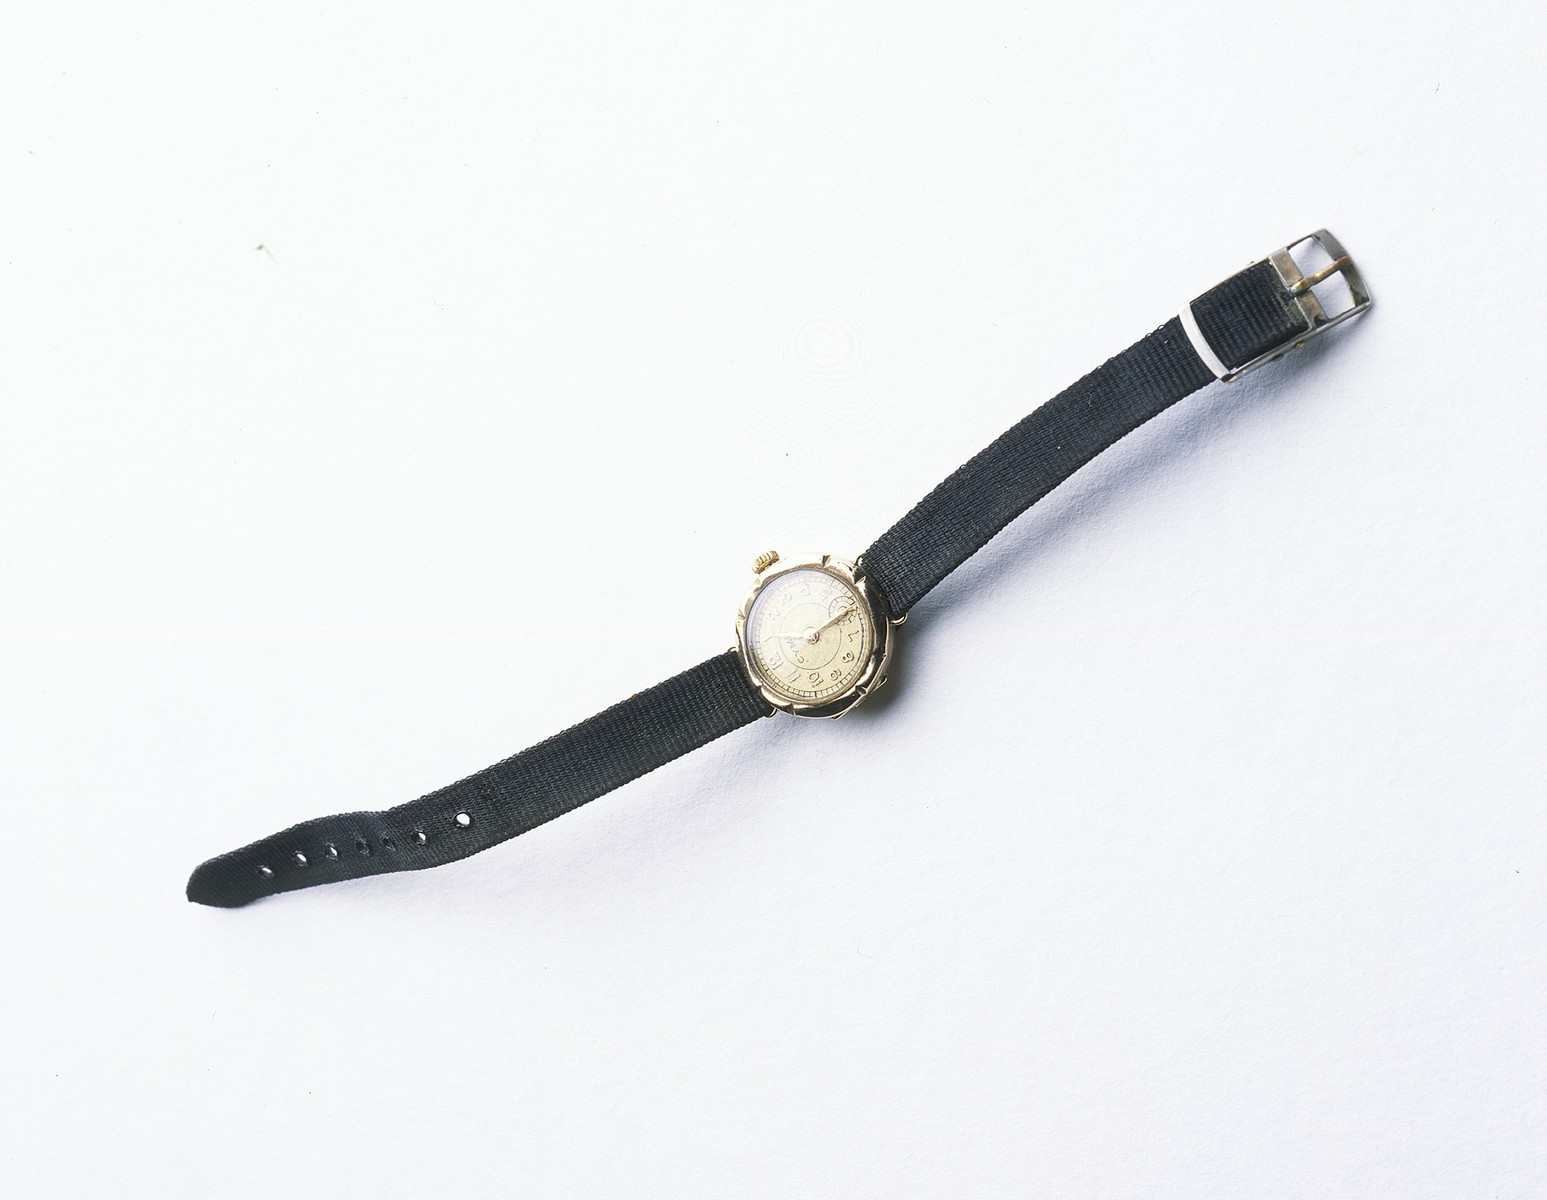 A watch given to Anna Cheszes by her rescuer Madzia Strzelczyk.  

In May 1943, Dora Kaplan was able to smuggle a women's gold watch out of the Bialystok ghetto via Michal Kempinski for her daughter, Pola (later Anna Strzelczyk).  In the late 1960s, Madzia visited Anna and gave her the watch as a high school graduation gift with no explanation.  Anna was not interested in the watch.  Anna learned the truth about her birth and the watch only after Madzia's death in 1972.